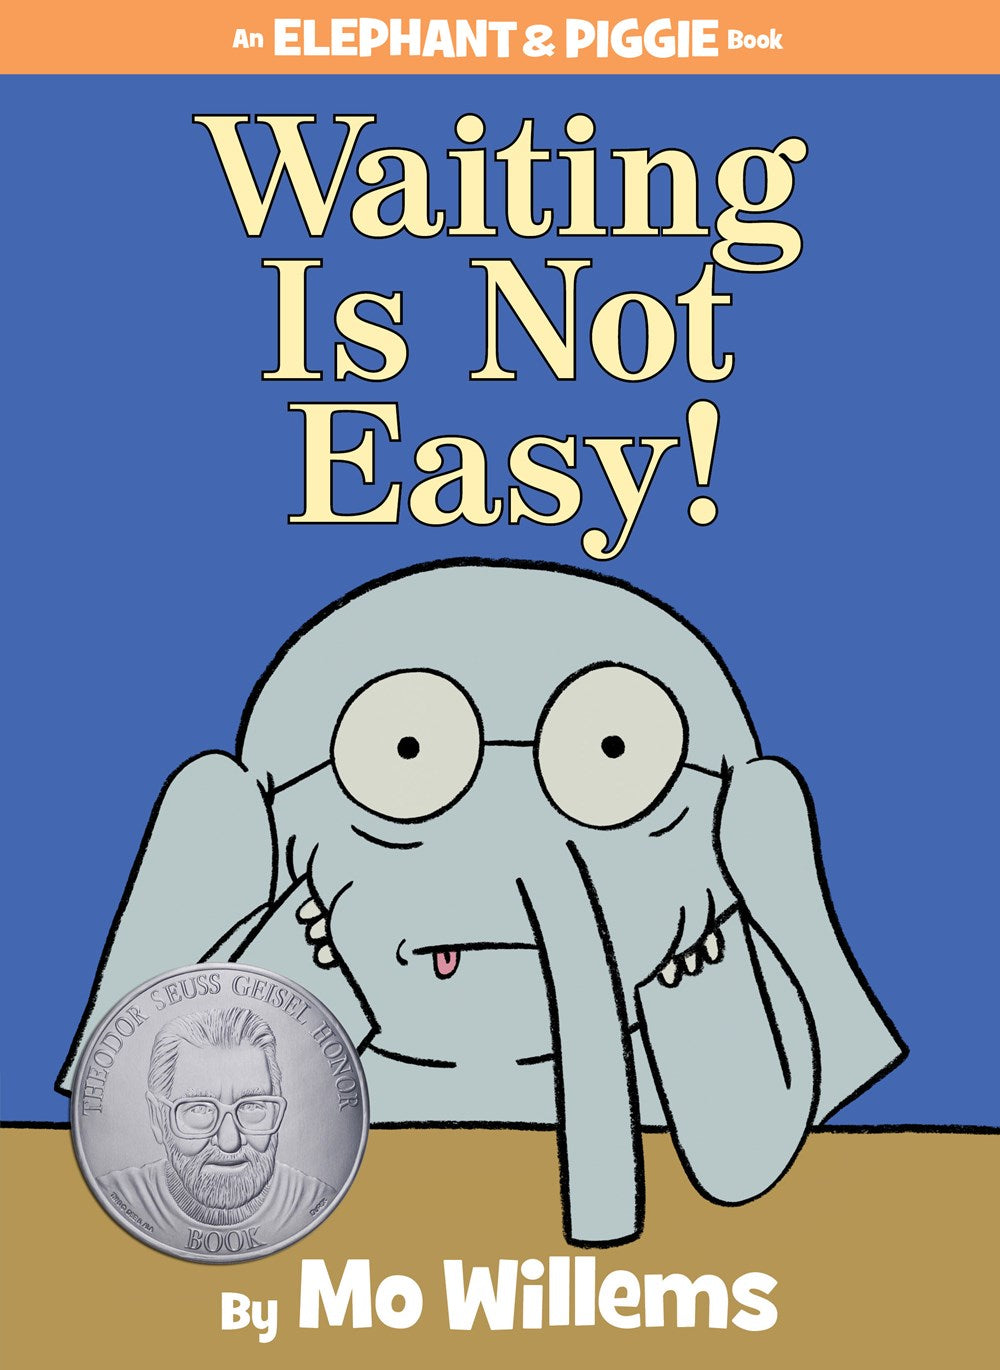 Waiting Is Not Easy! by Mo Willems (An Elephant & Piggie Book)